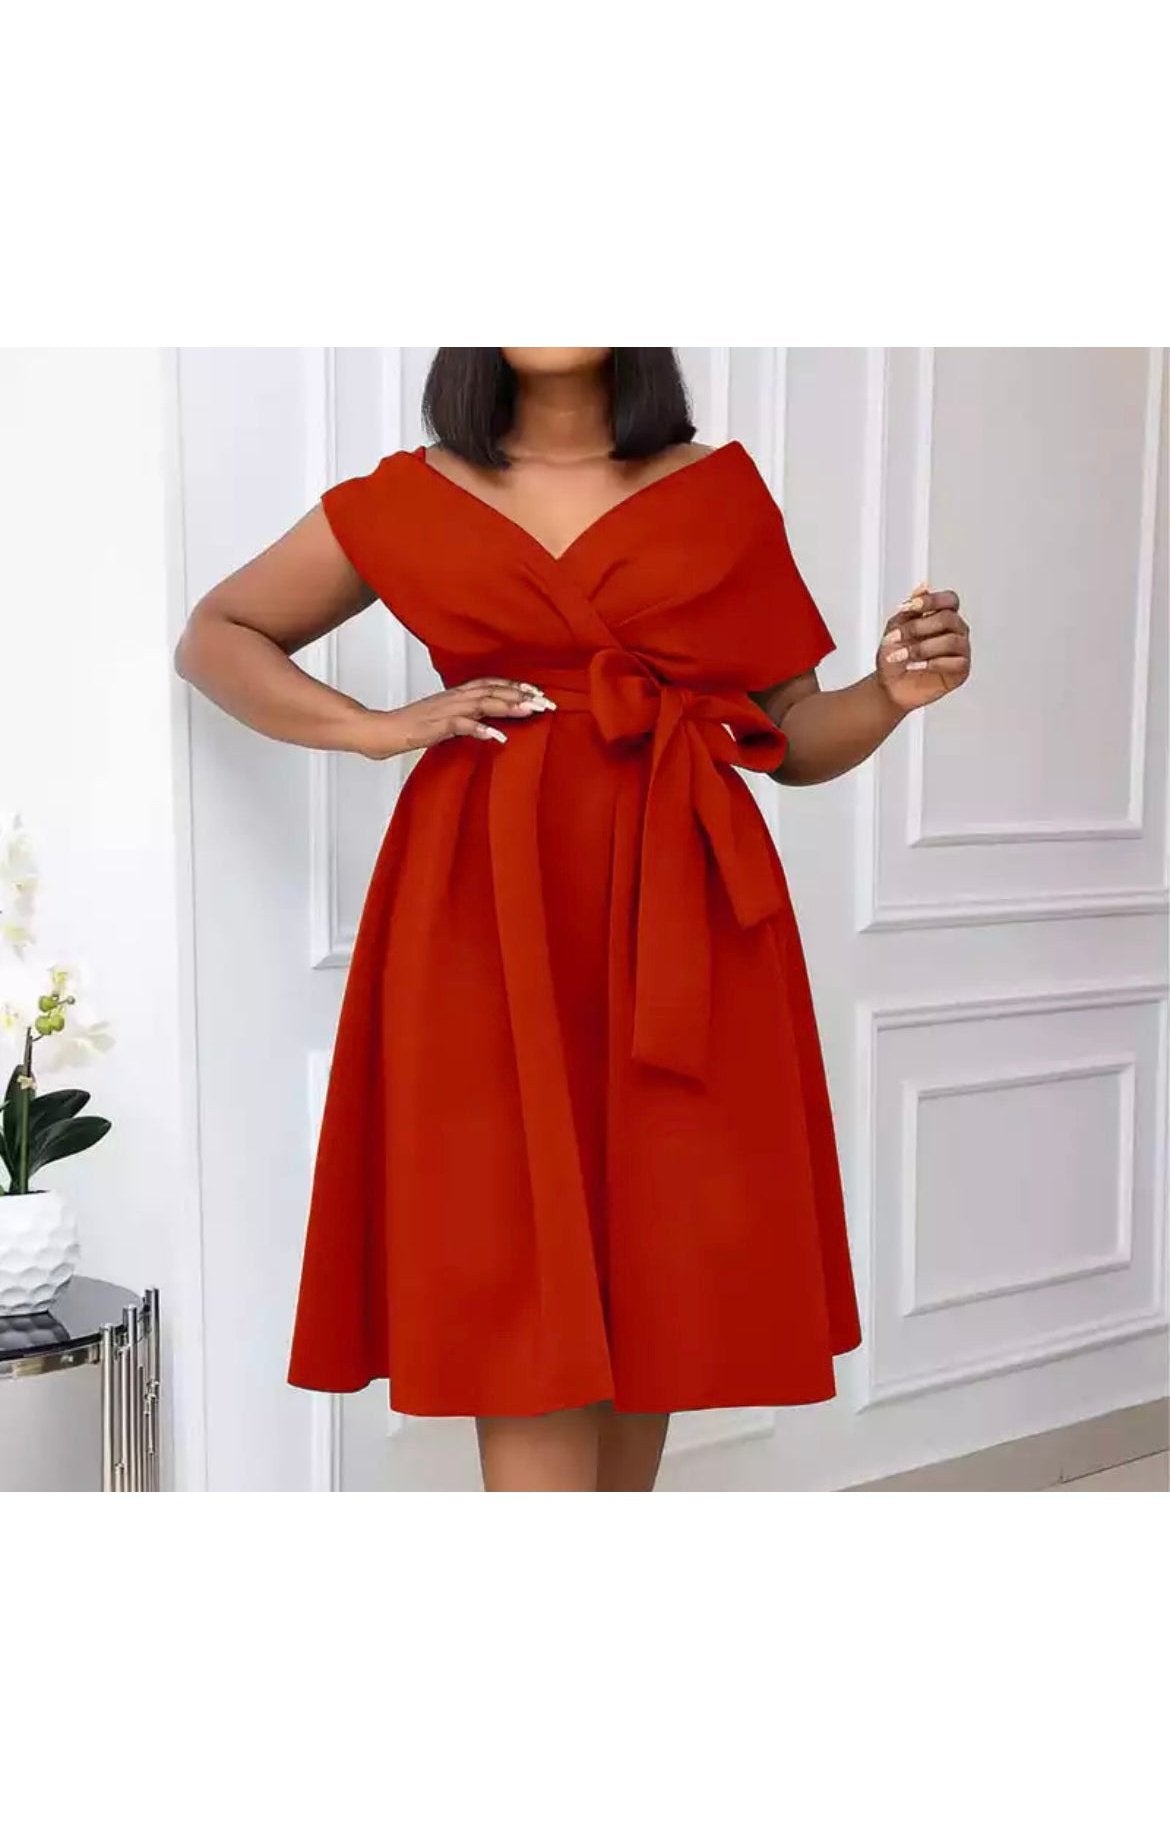 Beautiful Flowy Plus Size Available Knee Length Bow Dress (Many Colors)